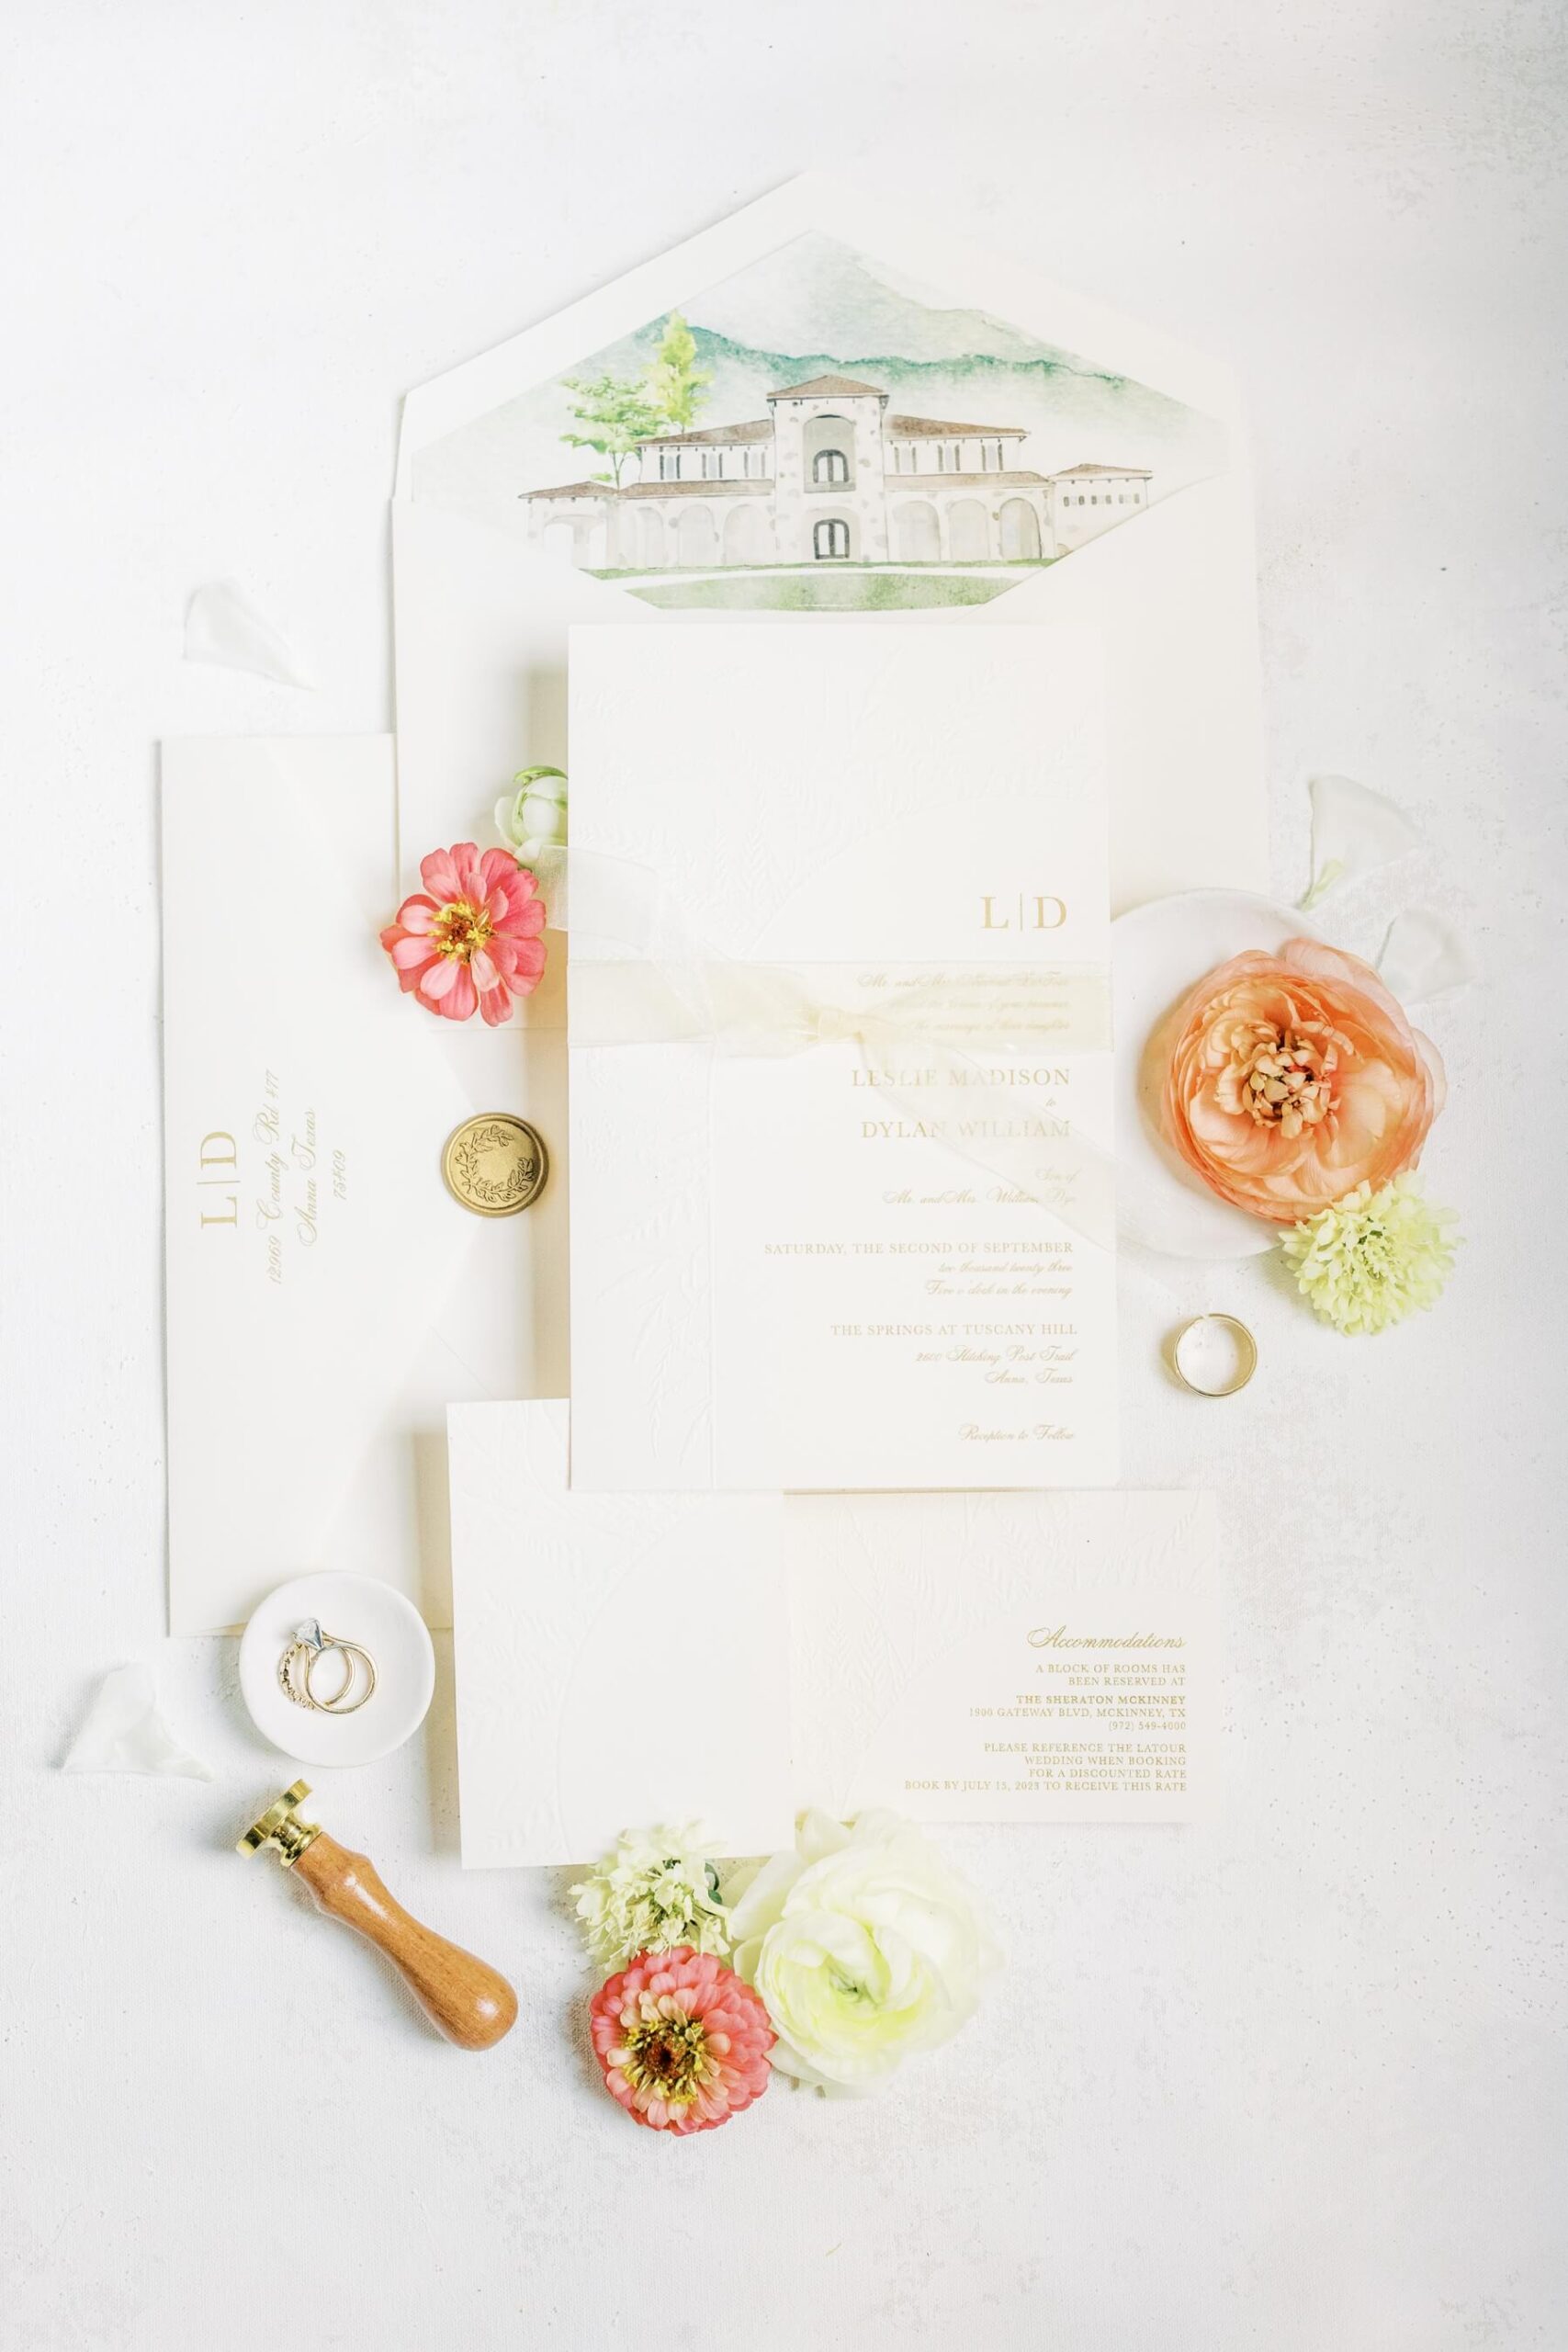 Wedding invitation flat lay featuring white invitations with gold font, wedding rings, and pink and white flowers